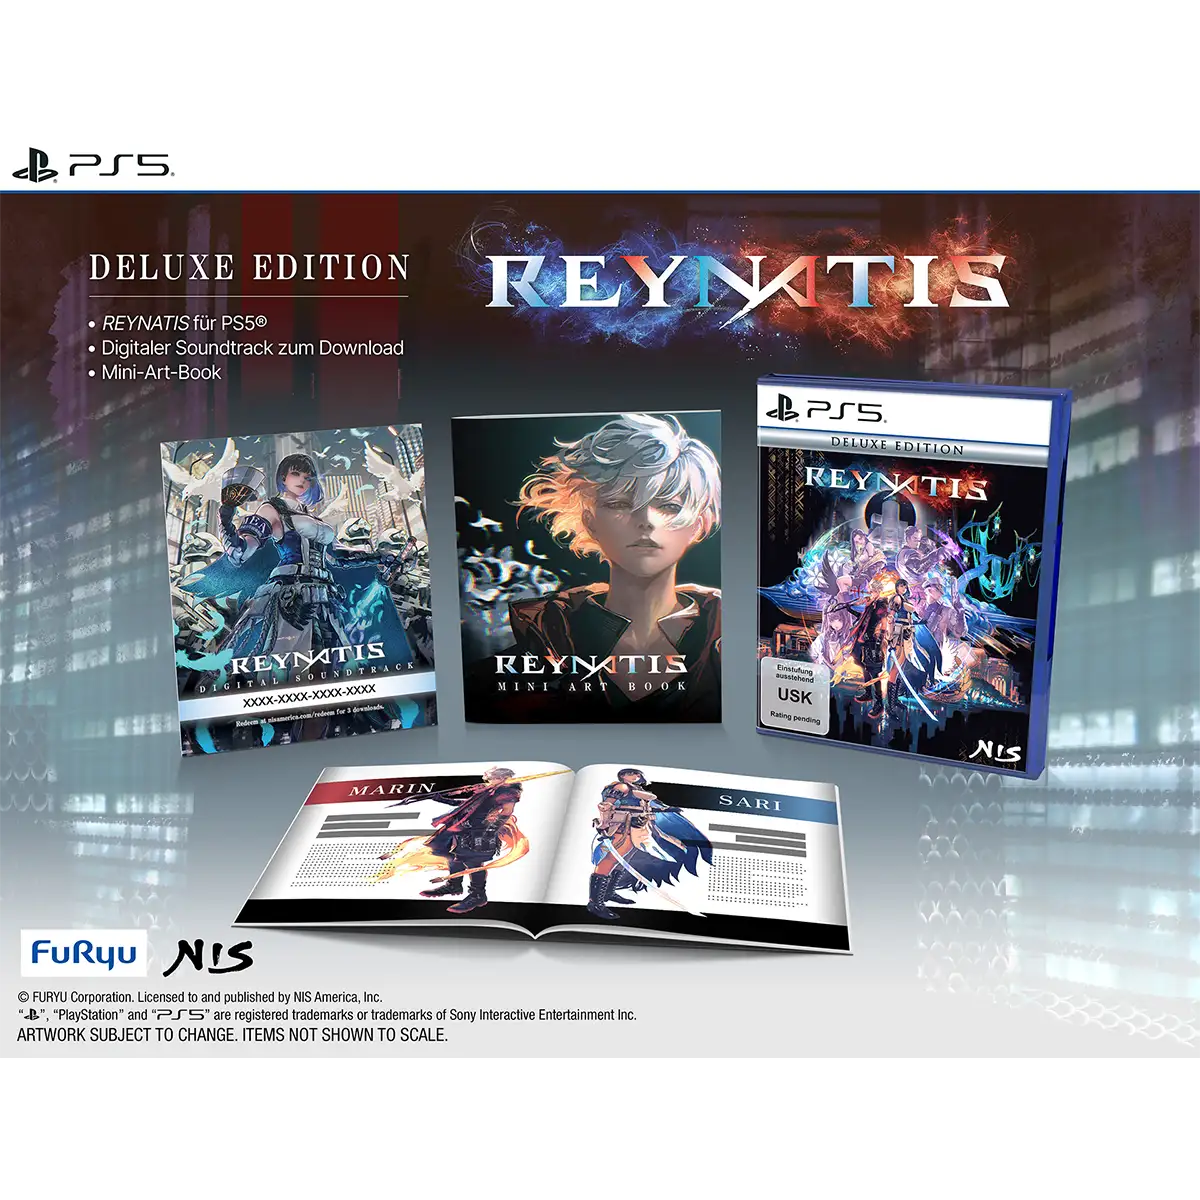 REYNATIS - Deluxe Edition (PS5) Image 2